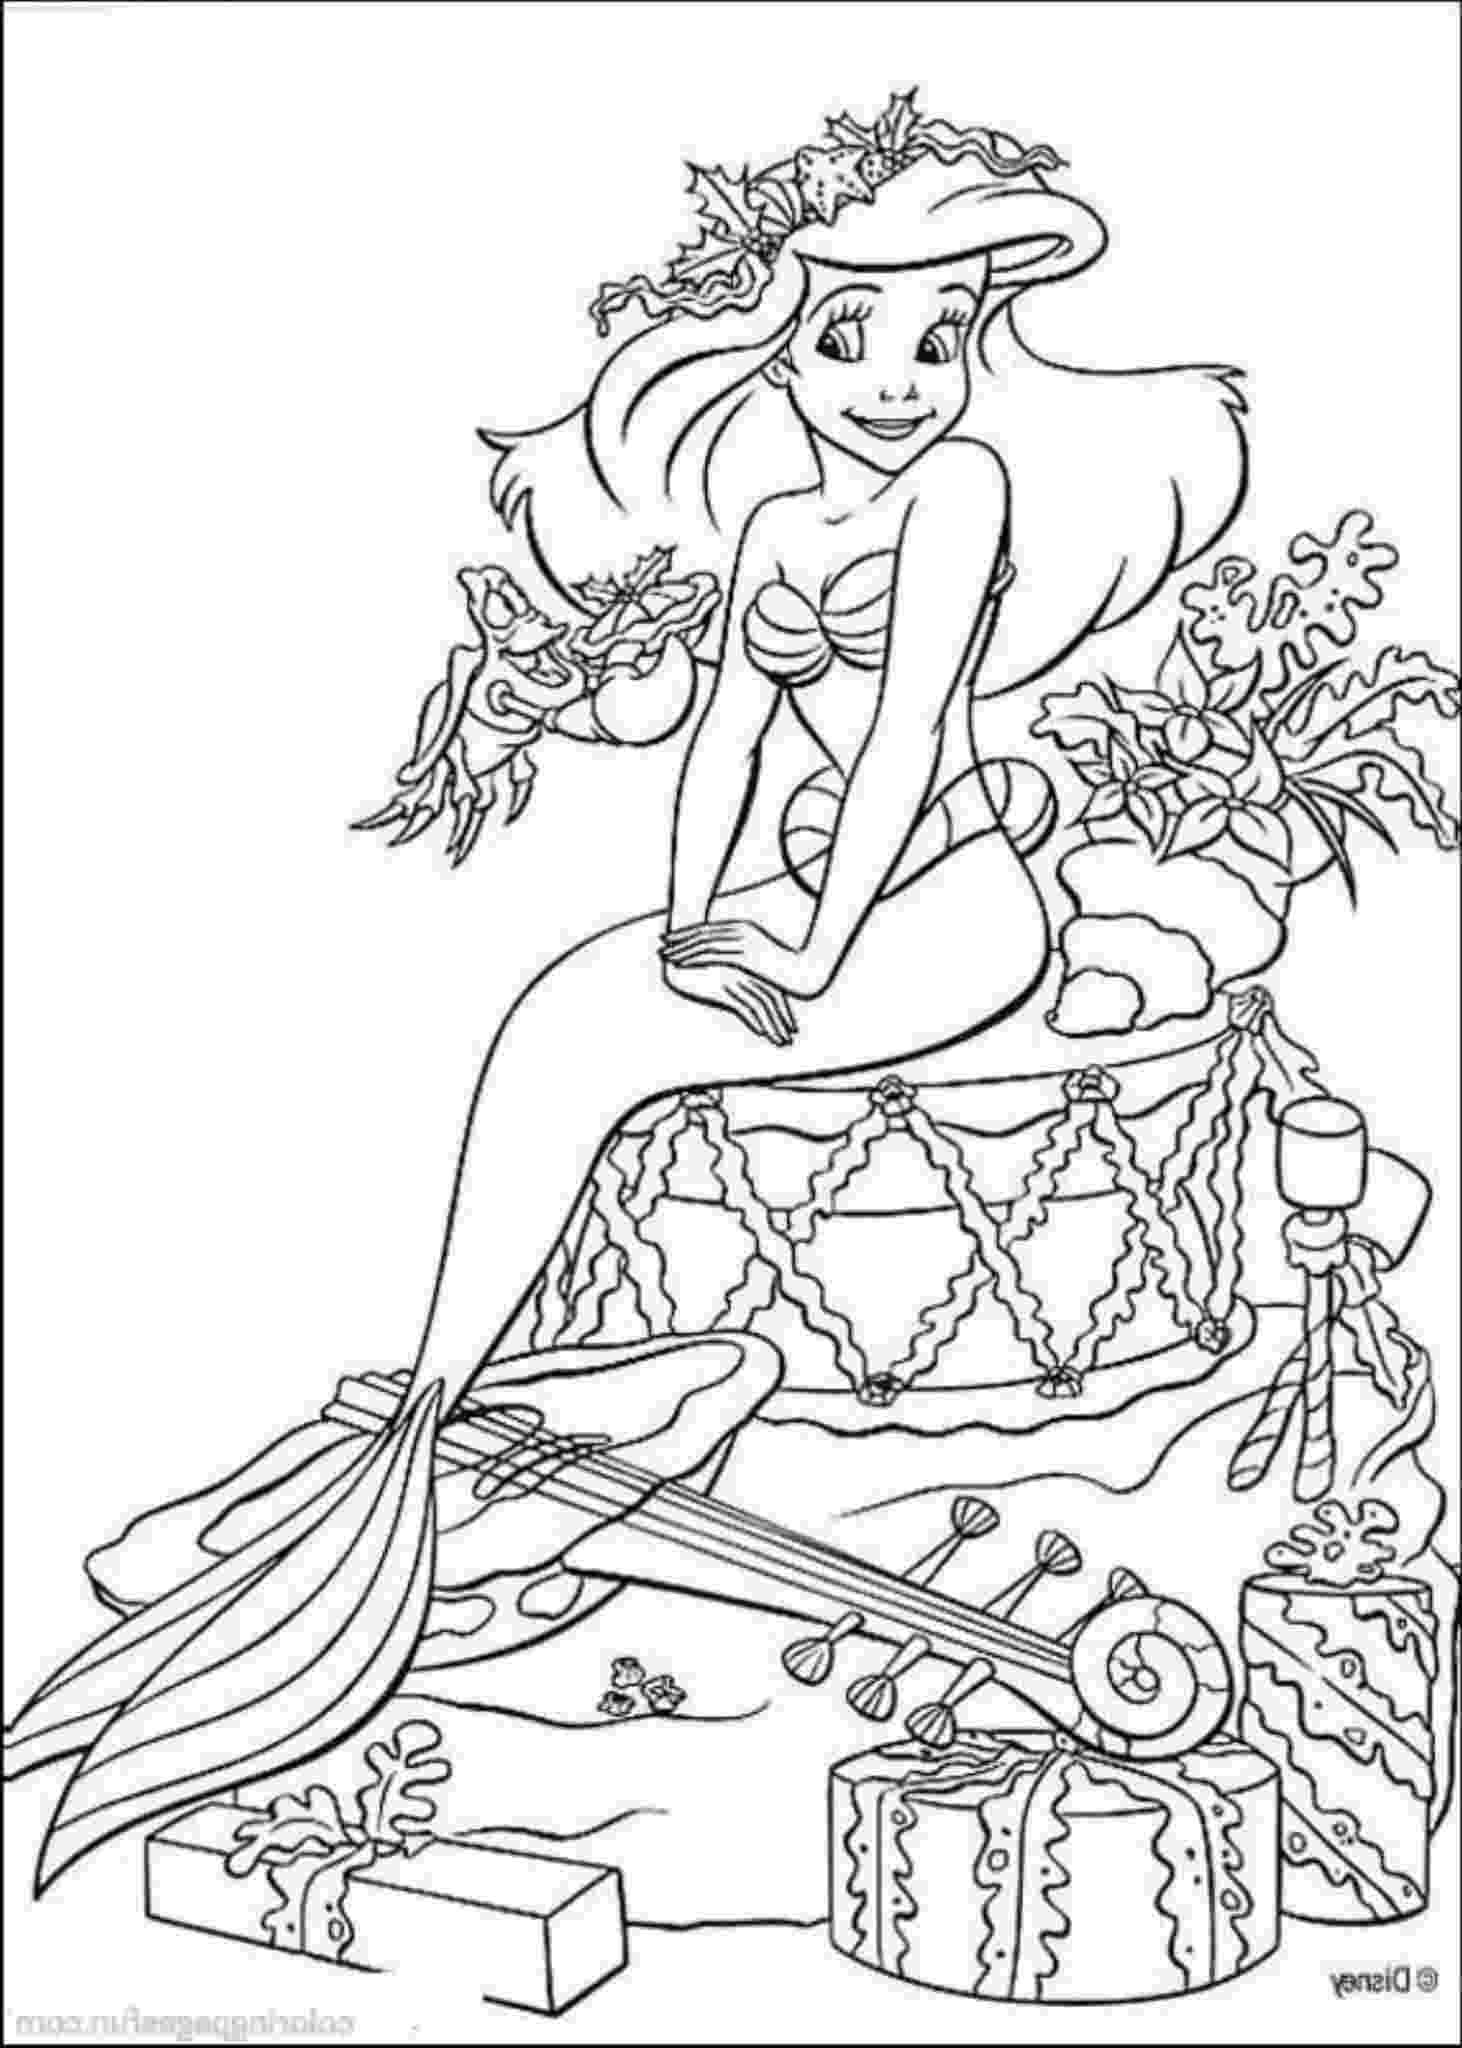 mermaid coloring page print download find the suitable little mermaid mermaid page coloring 